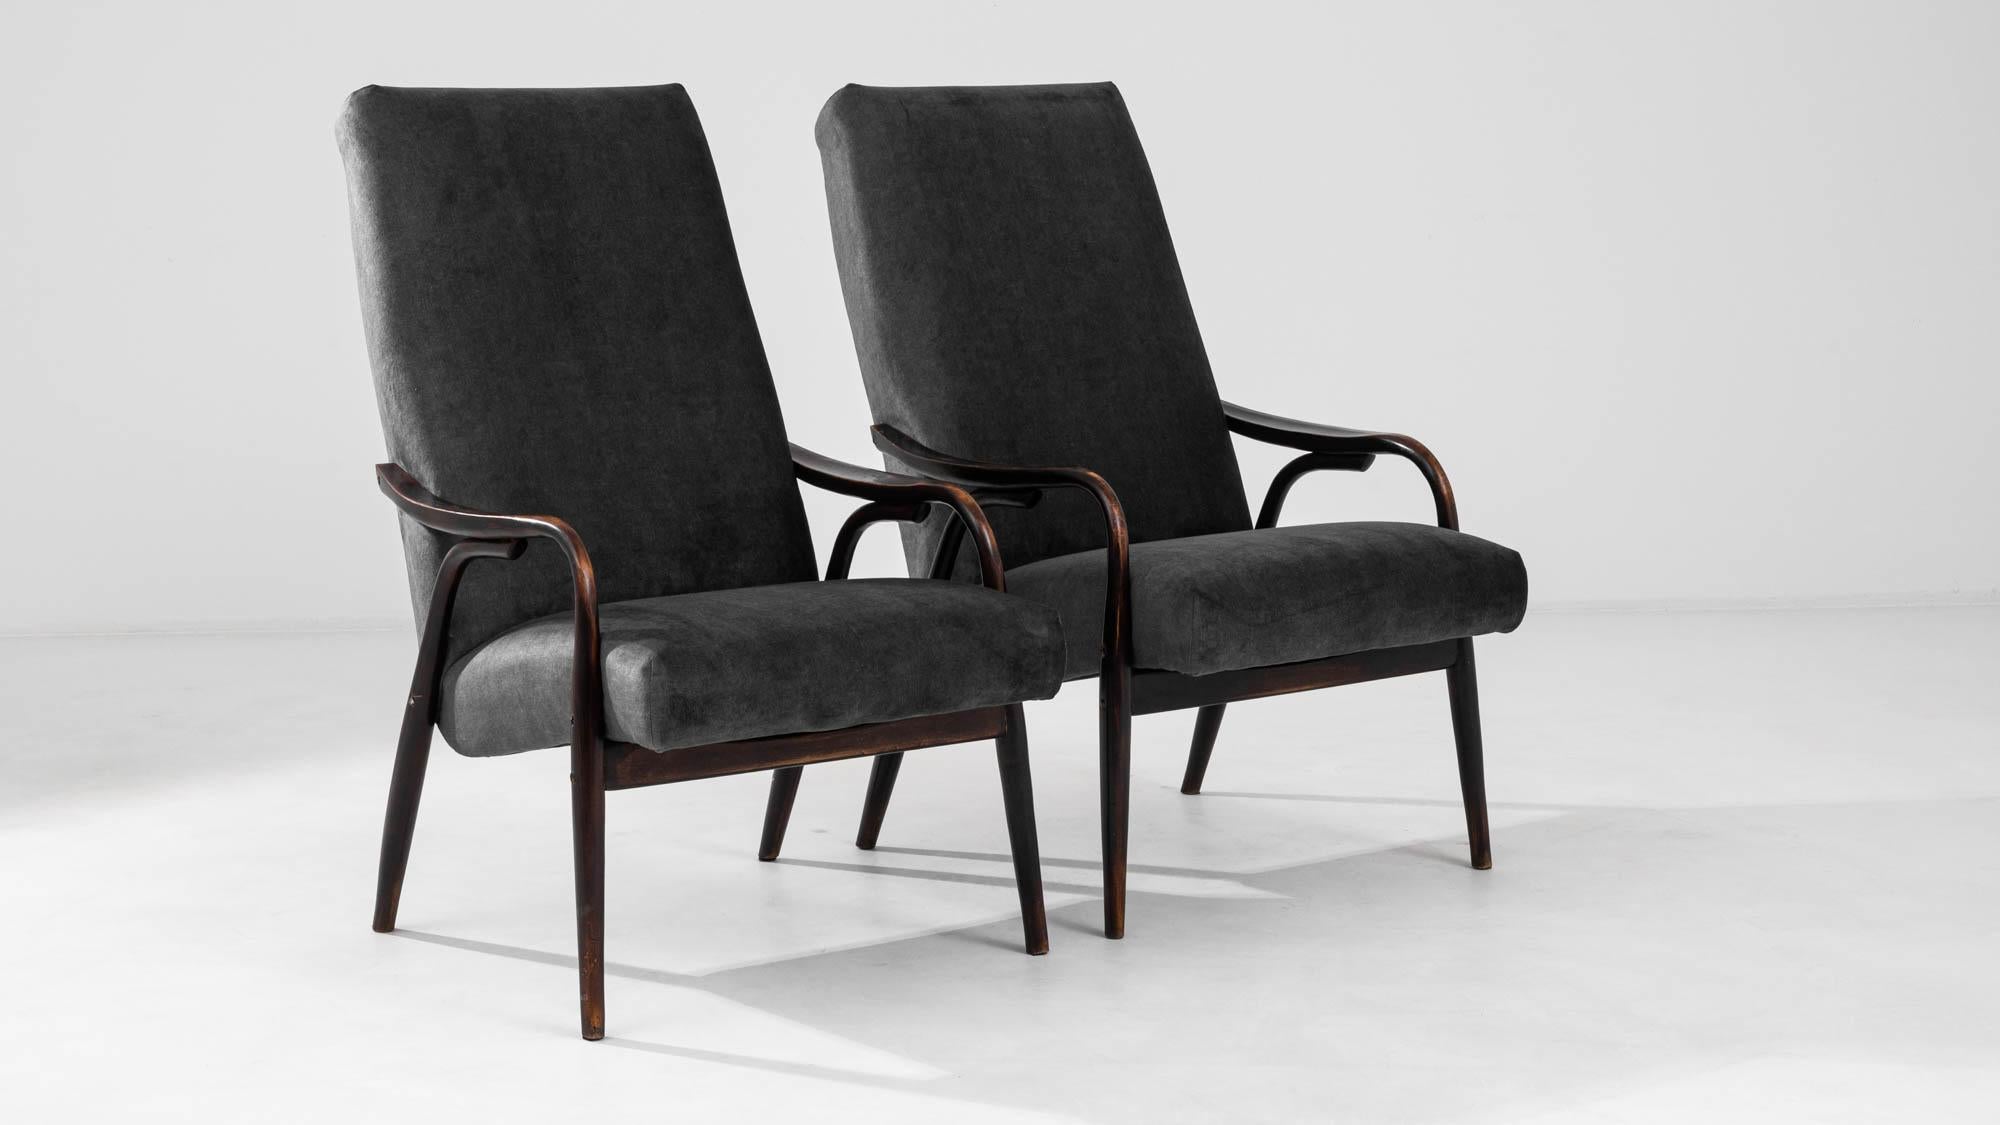 1960s Czech Upholstered Armchairs By TON, a Pair For Sale 8